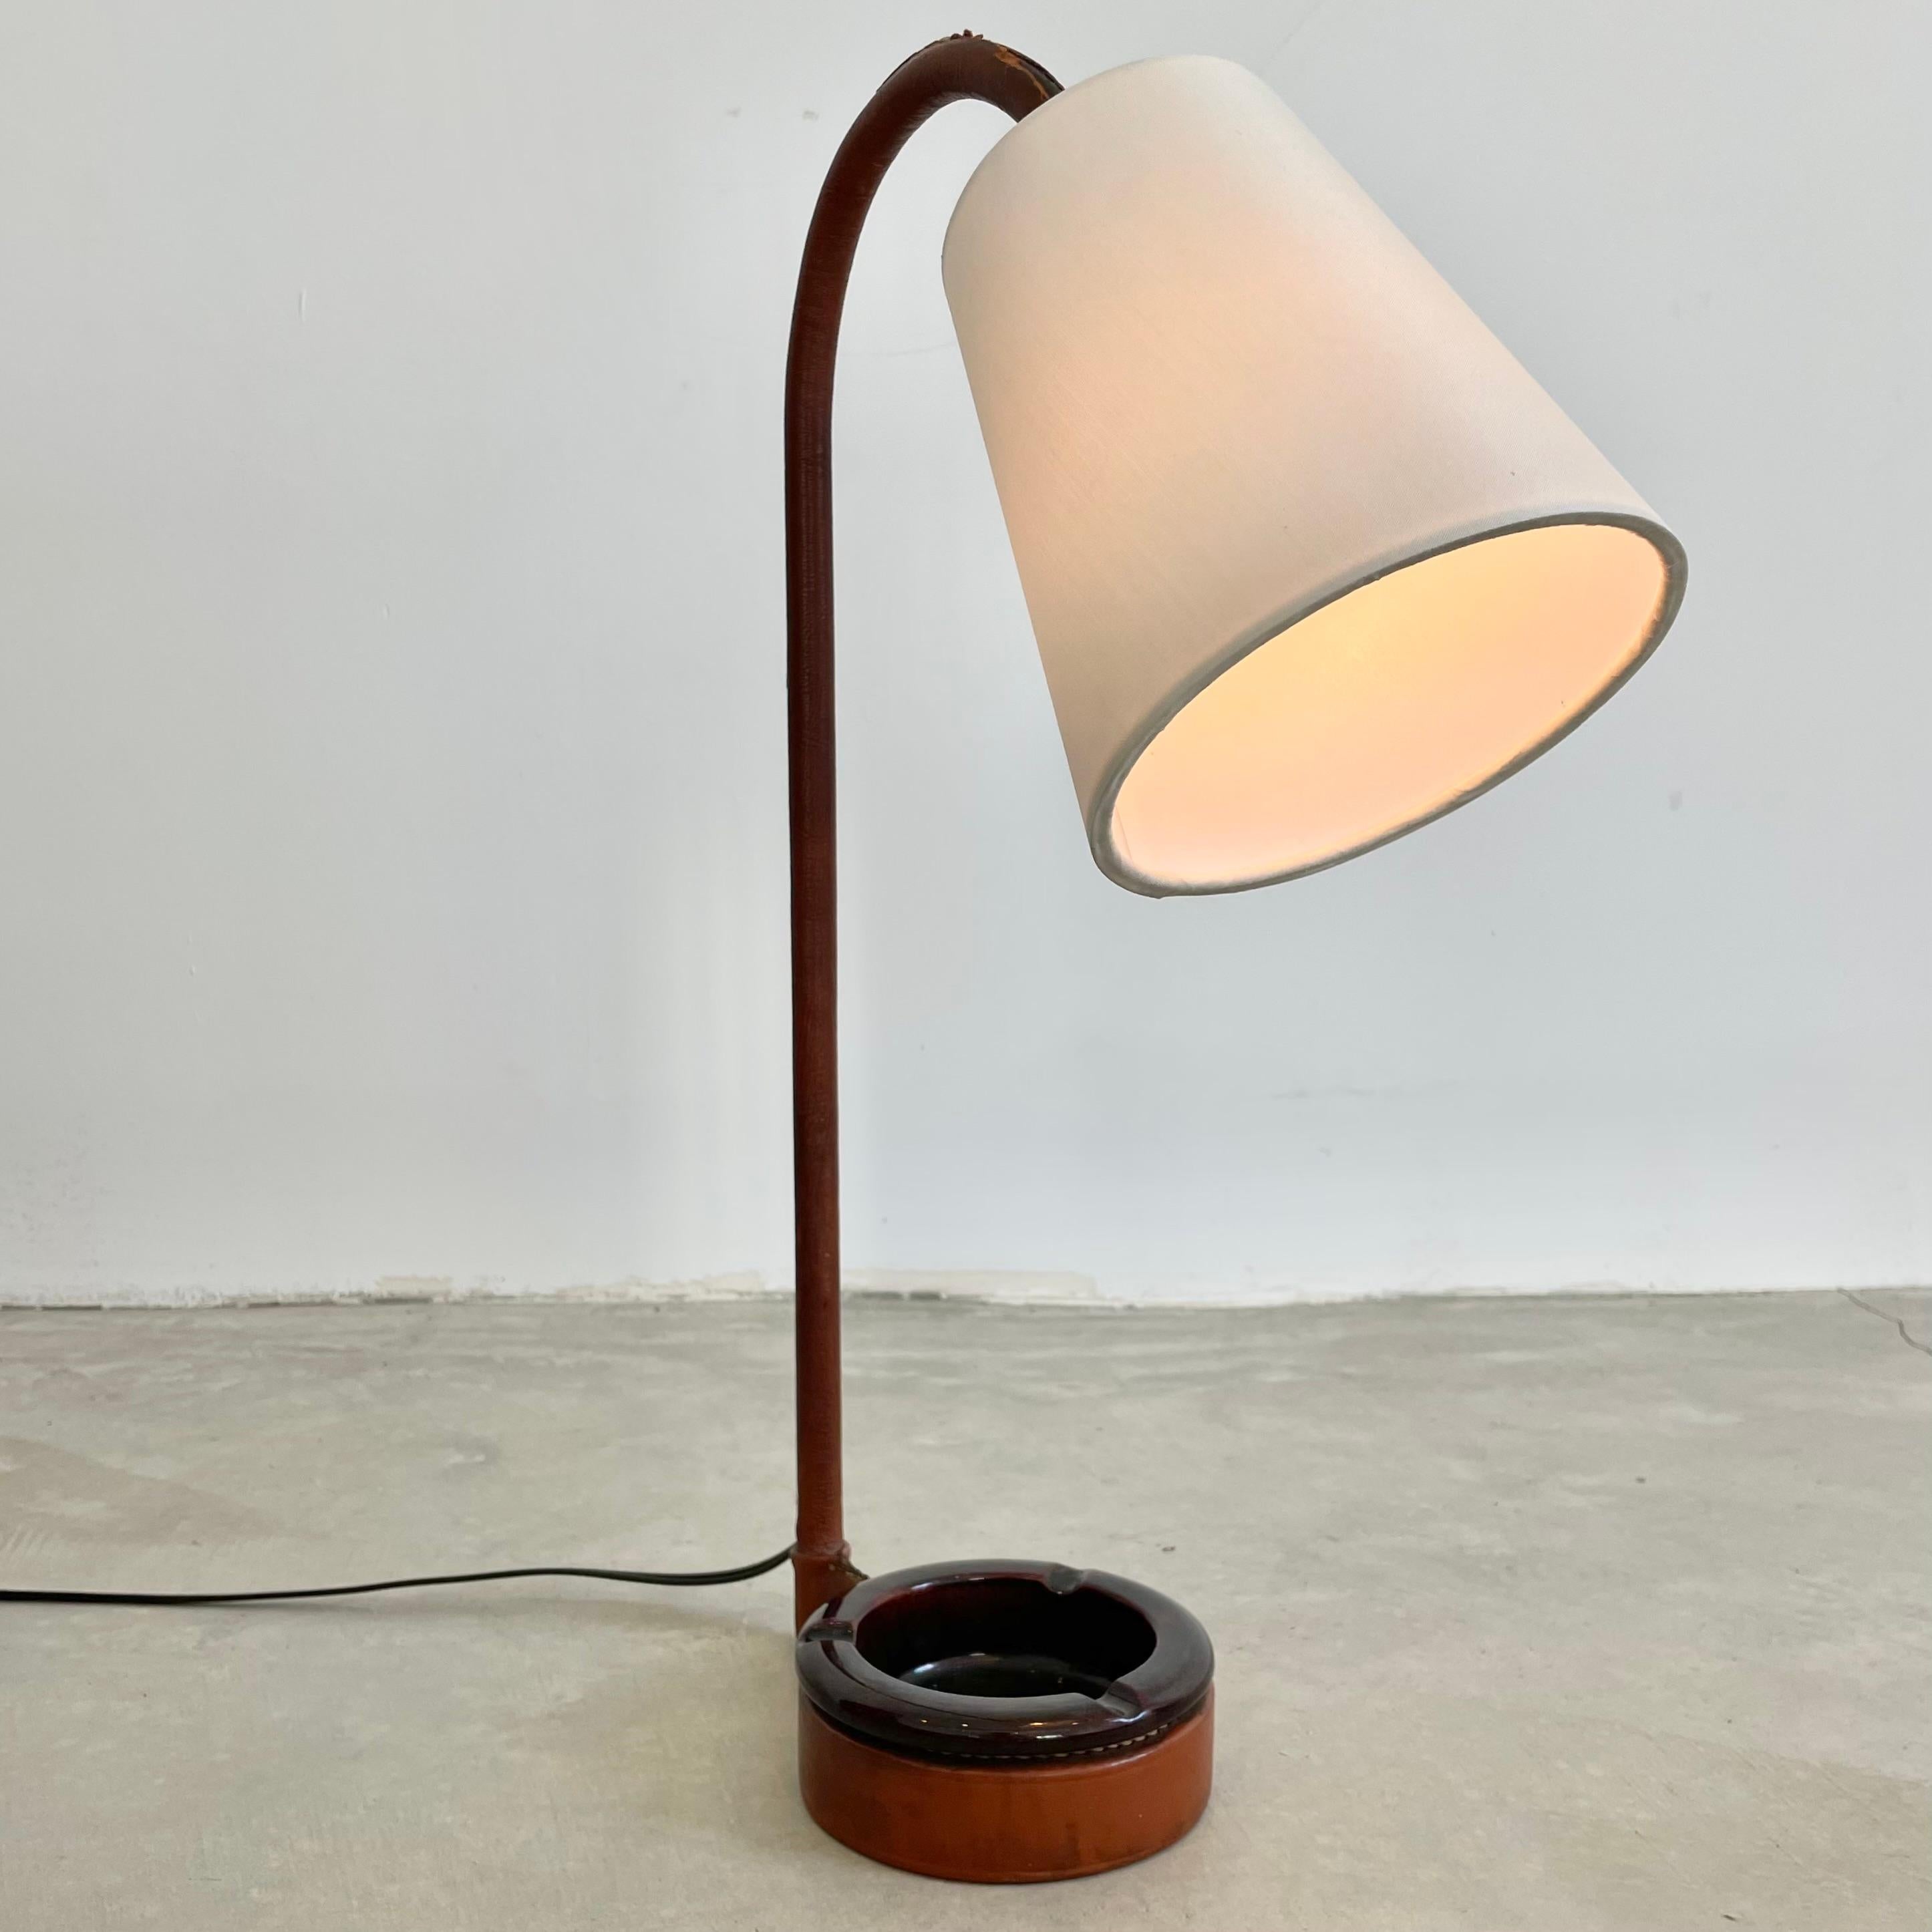 Jacques Adnet Leather Table Lamp with Built-in Catchall, 1950s France For Sale 6